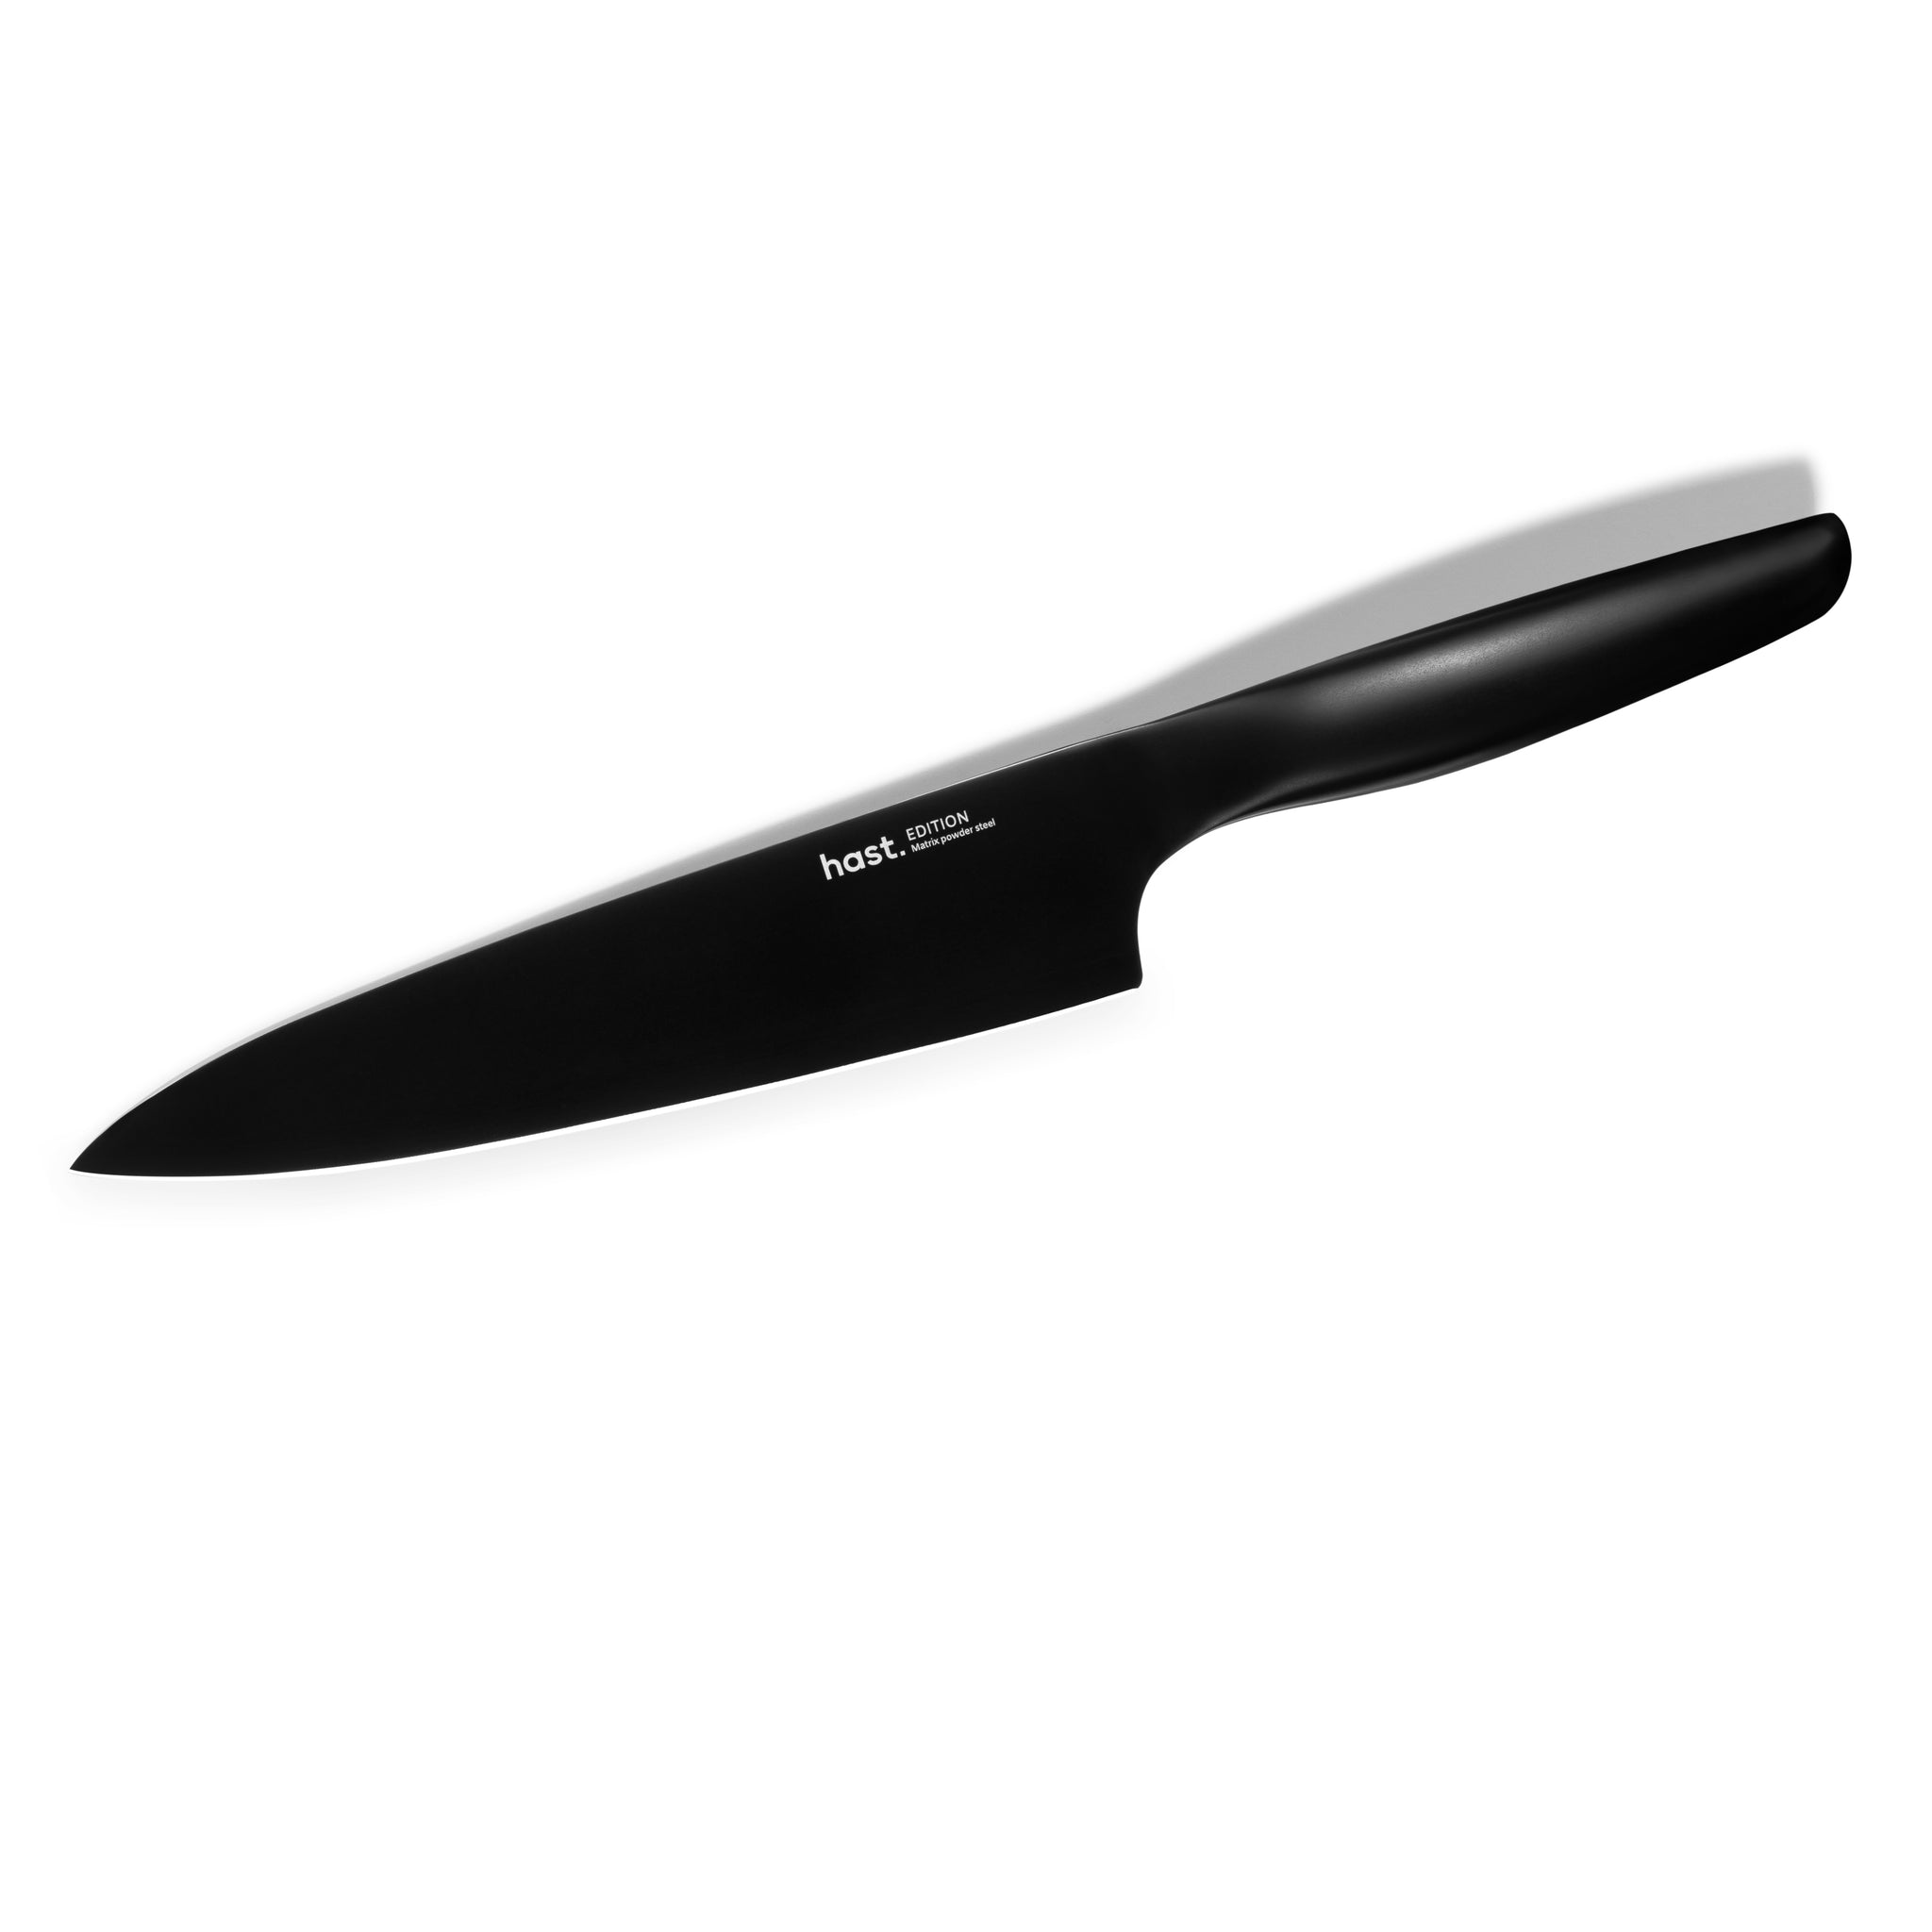 8 Inch Modern Chef Knife with Comfort Handle, Best Kitchen Gear